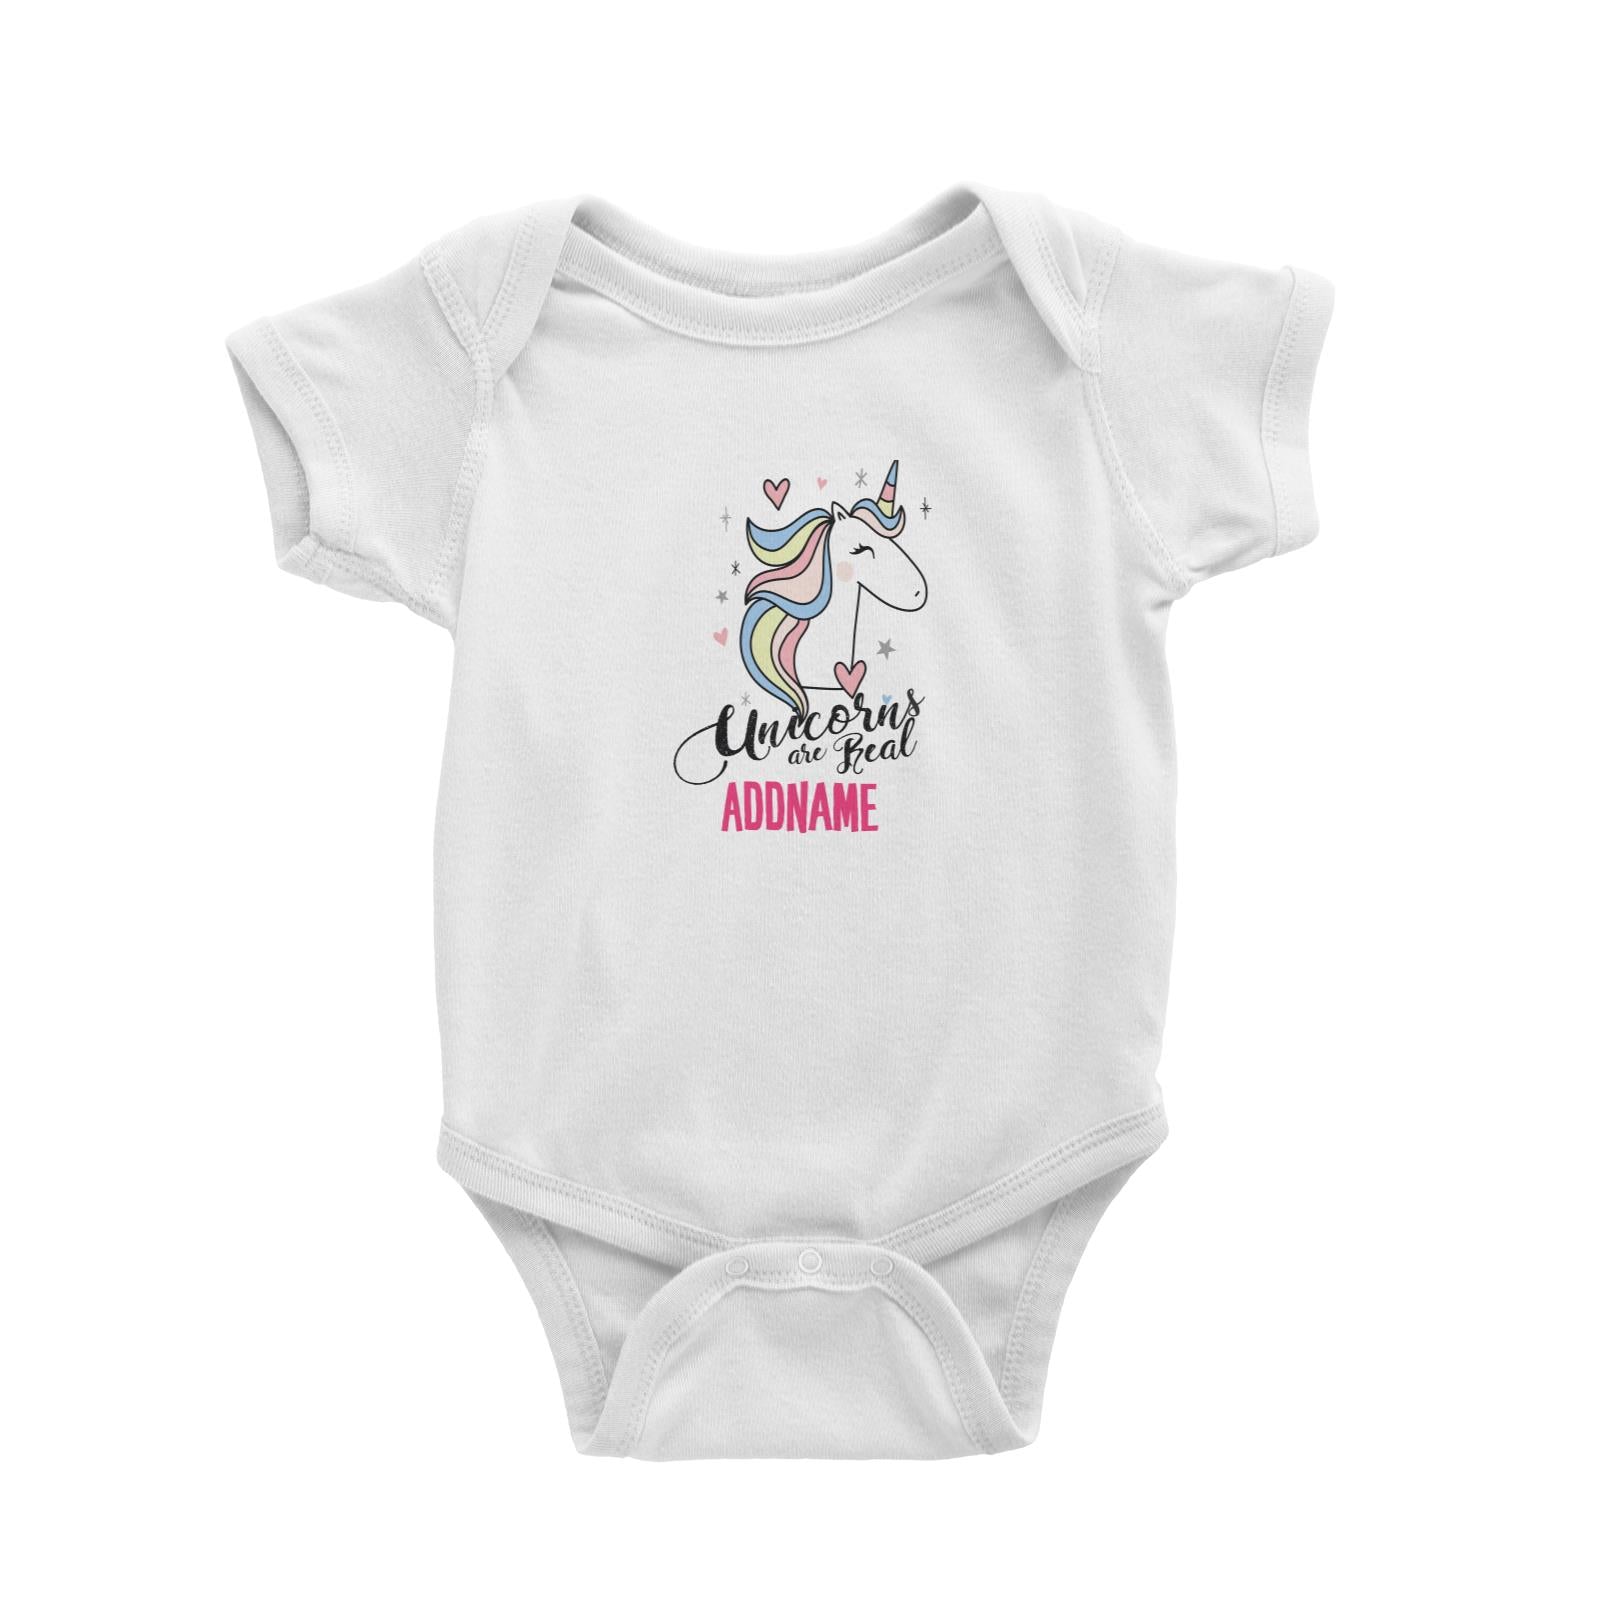 Cool Vibrant Series Unicorns Are Real Addname Baby Romper [SALE]